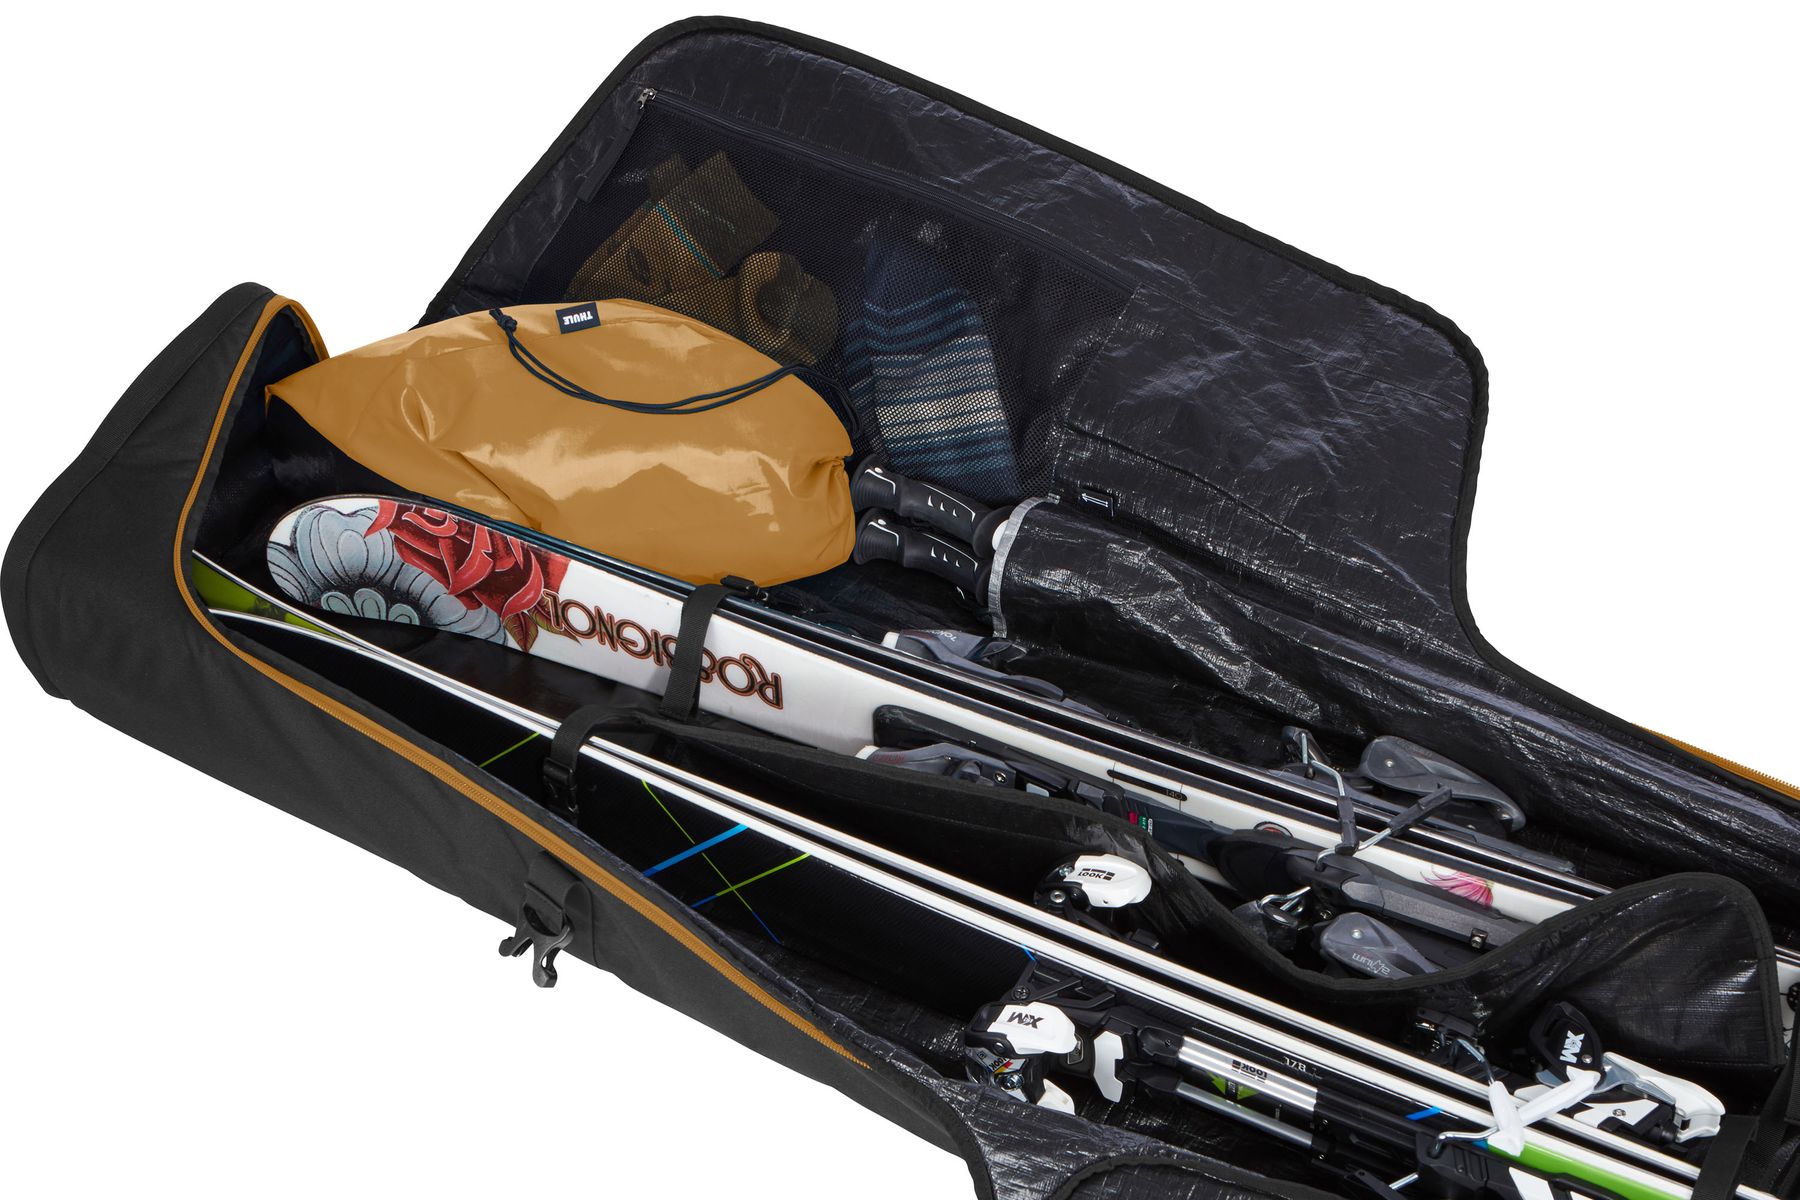 Thule RoundTrip | Thule | United States